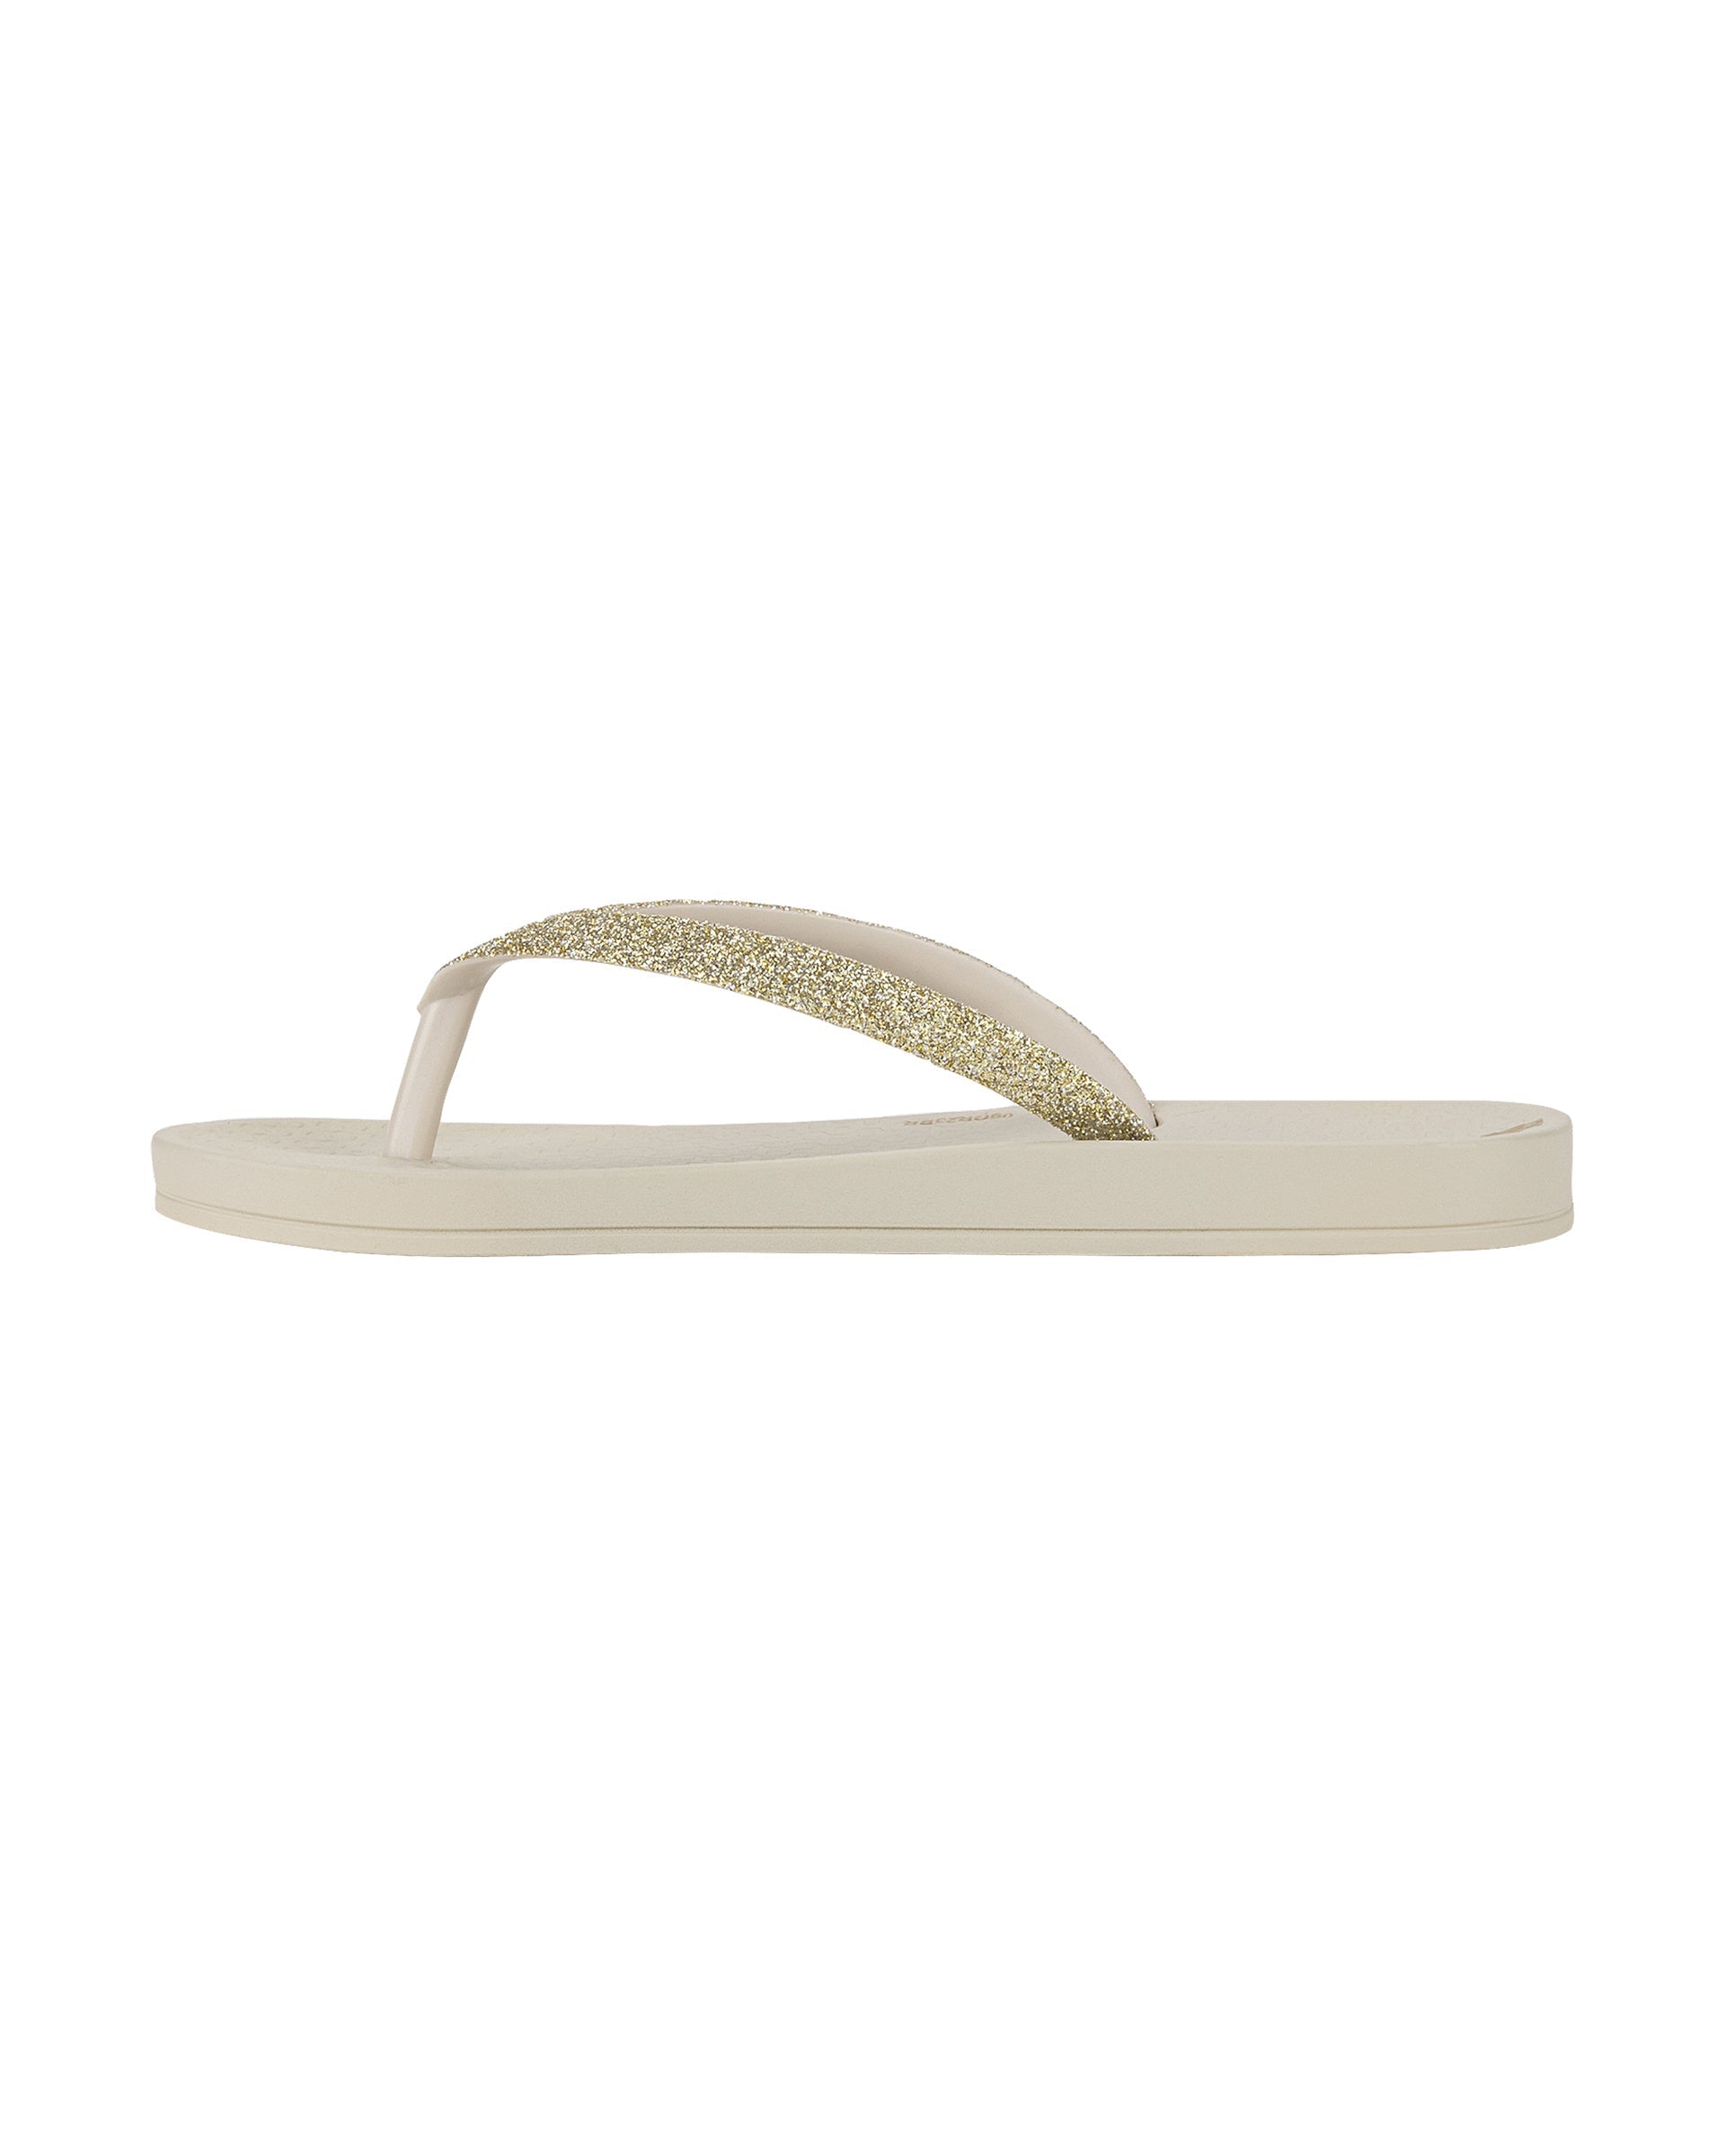 Inner side view of a beige Ipanema Ana Sparkle kids flip flop with gold glitter strap.